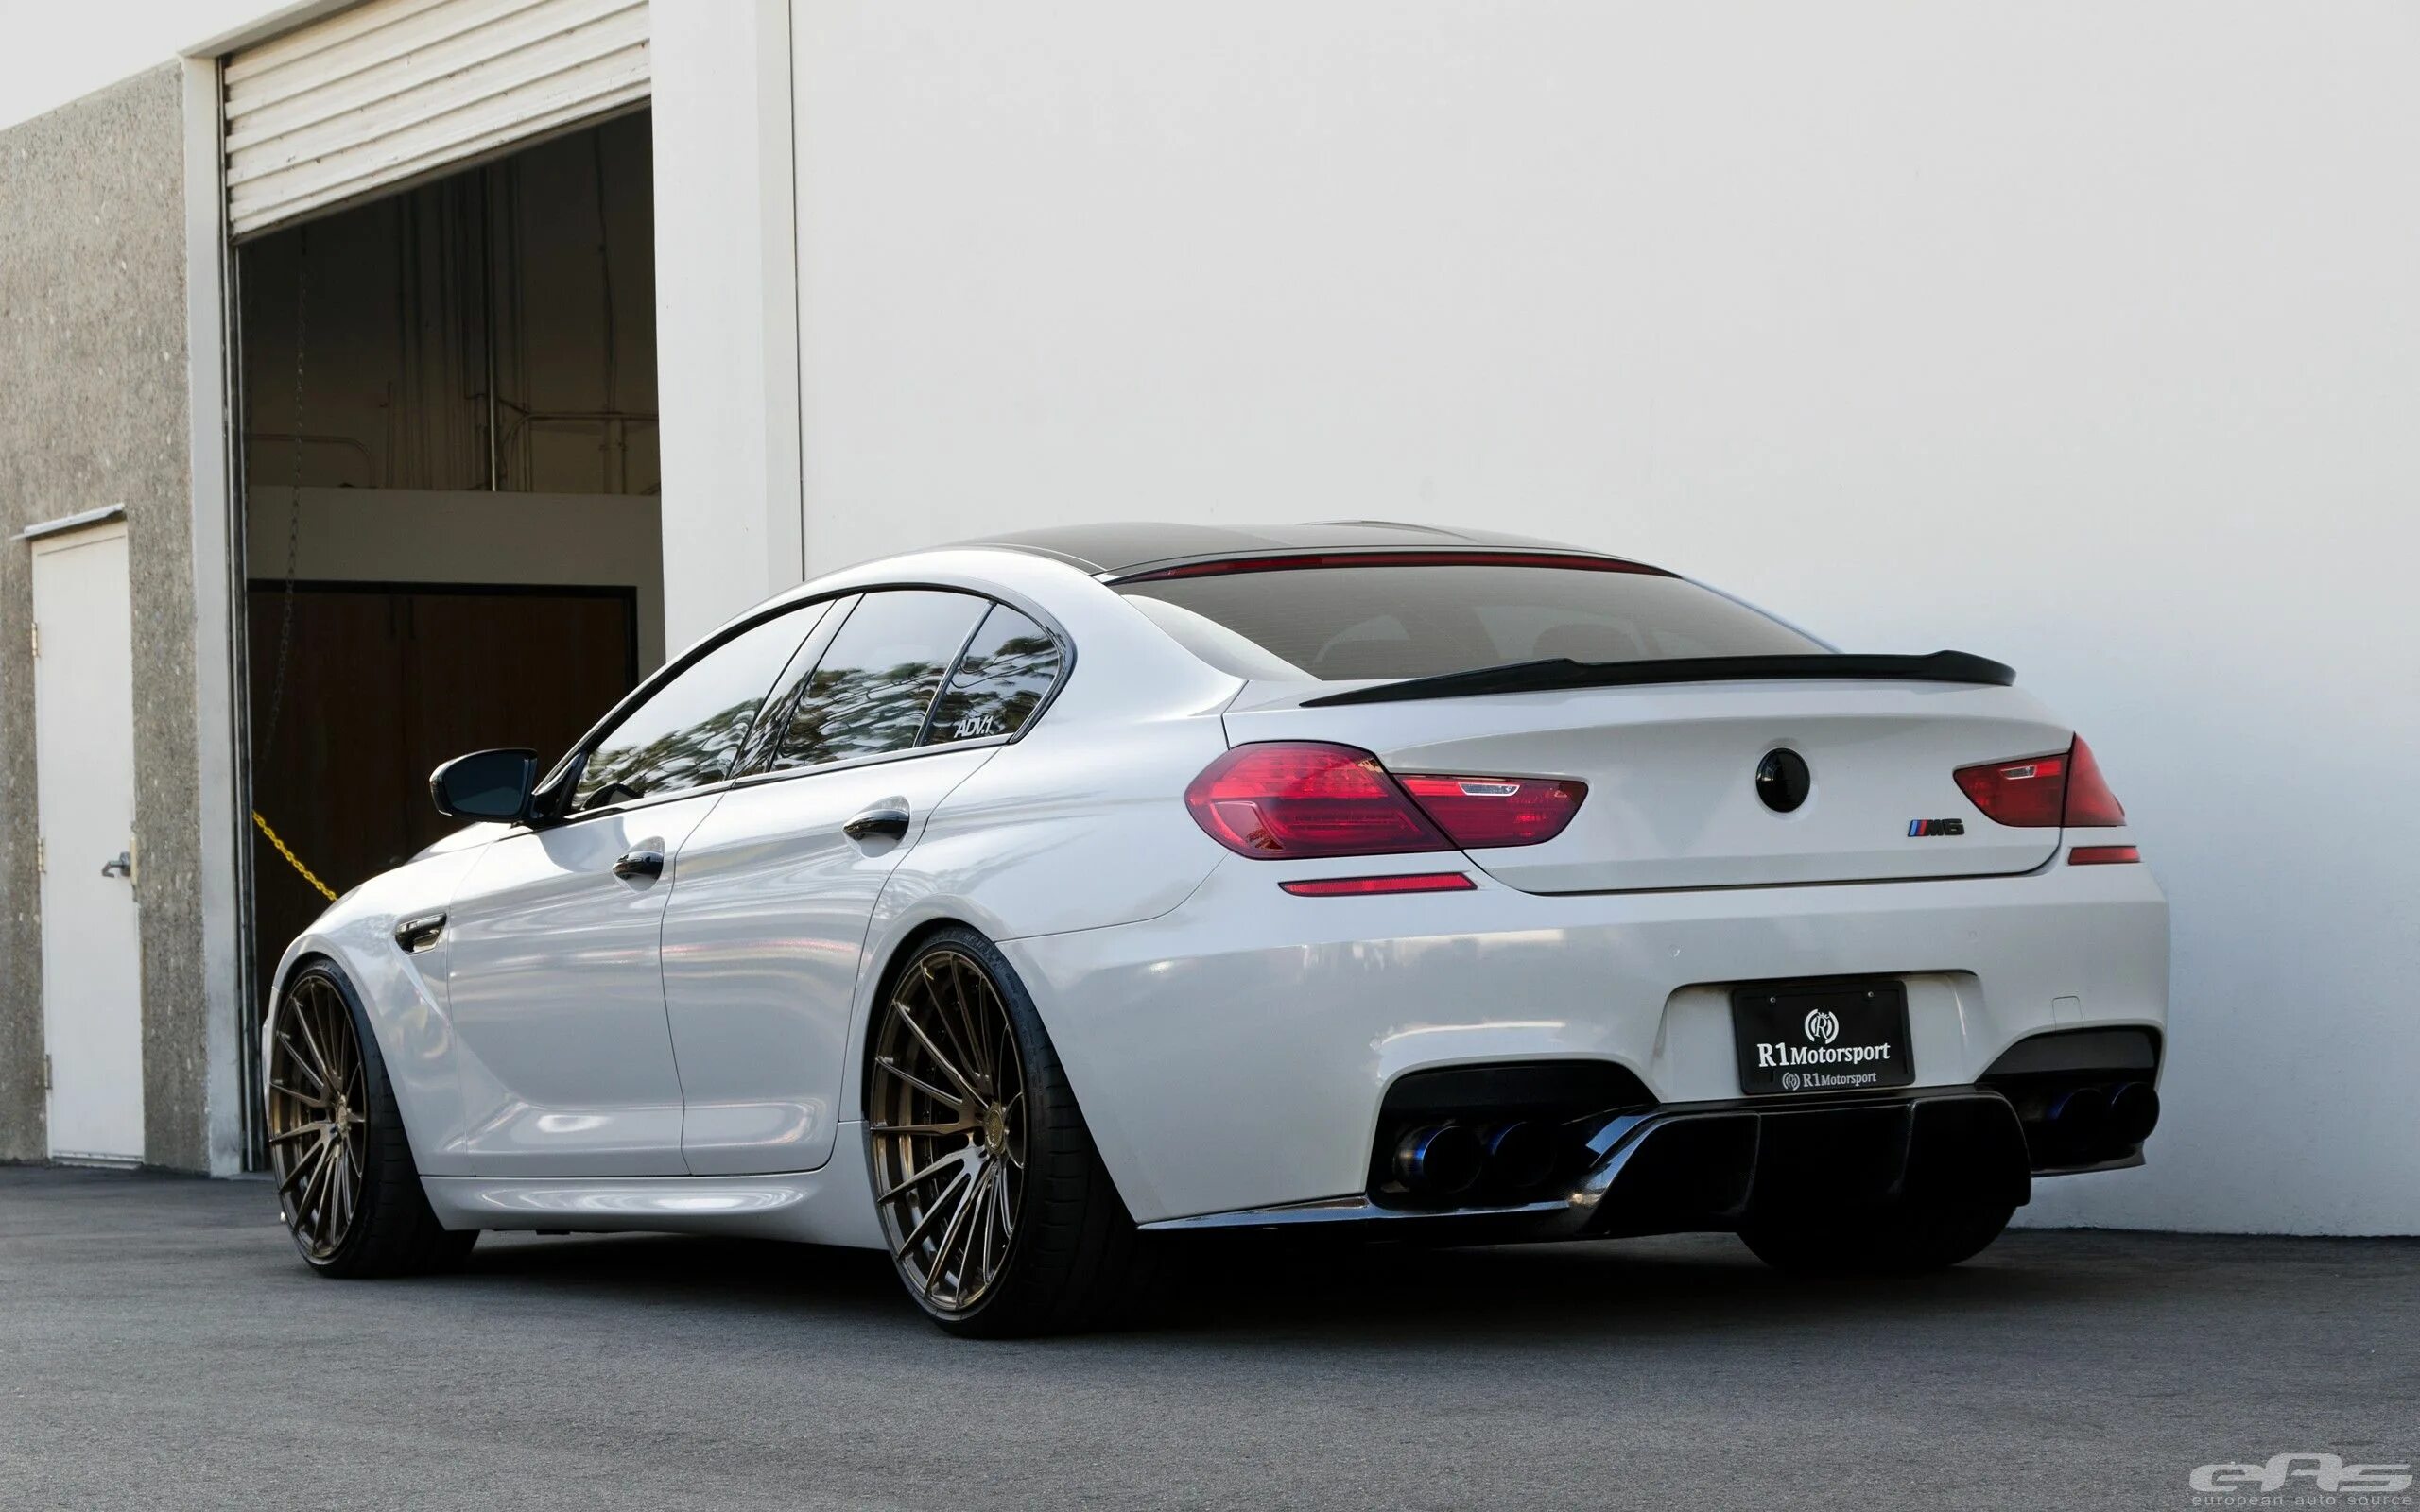 BMW m6 Gran Coupe. BMW m6 f10. BMW 6 Gran Coupe Tuning. BMW m6 Coupe Tuning.